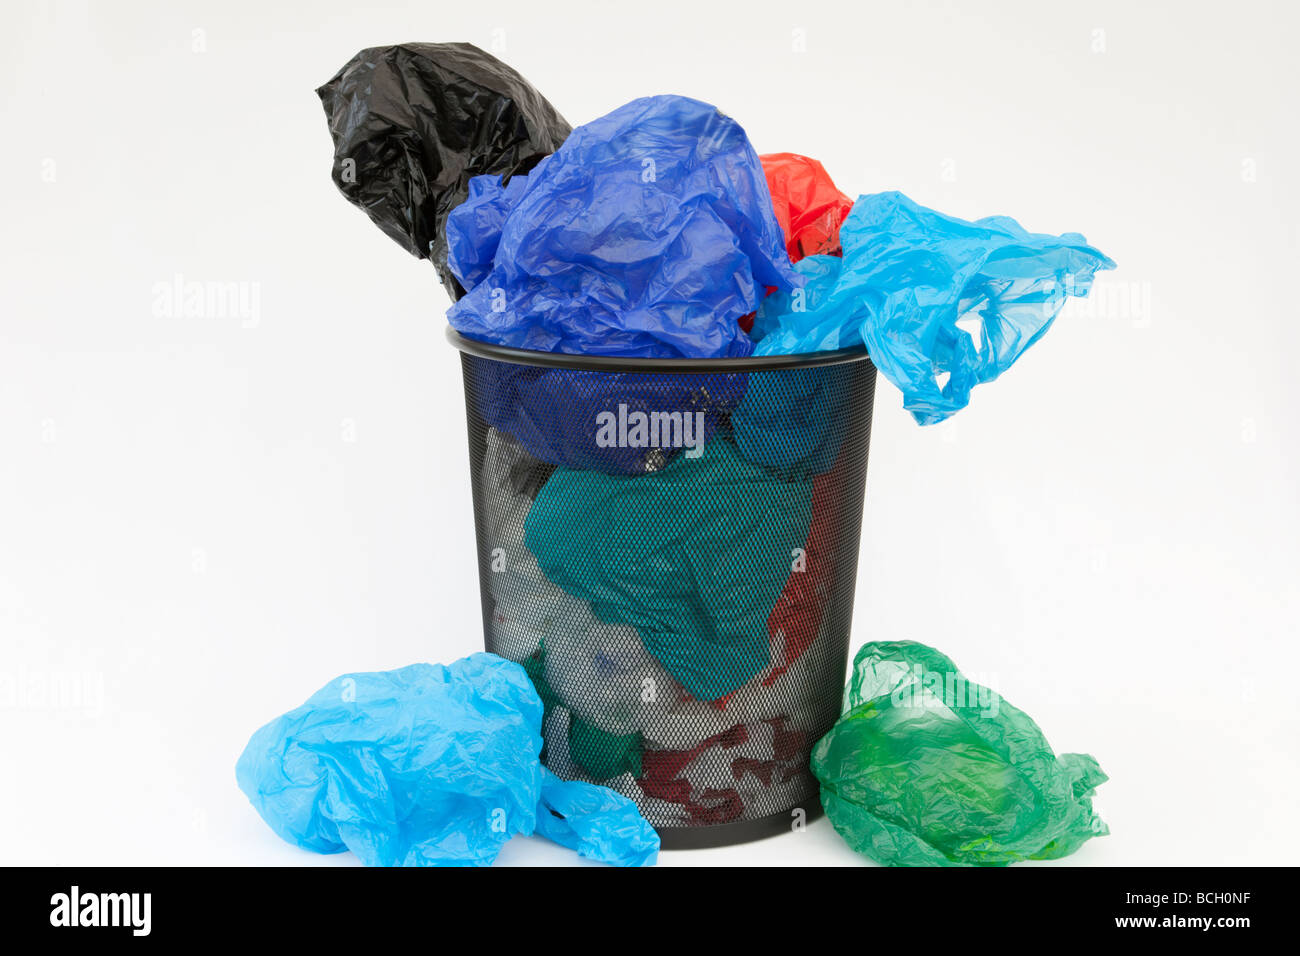 Disposable single-use non-biodegradable plastic shopping carrier bags in a waste bin on a white background. England Britain UK Stock Photo